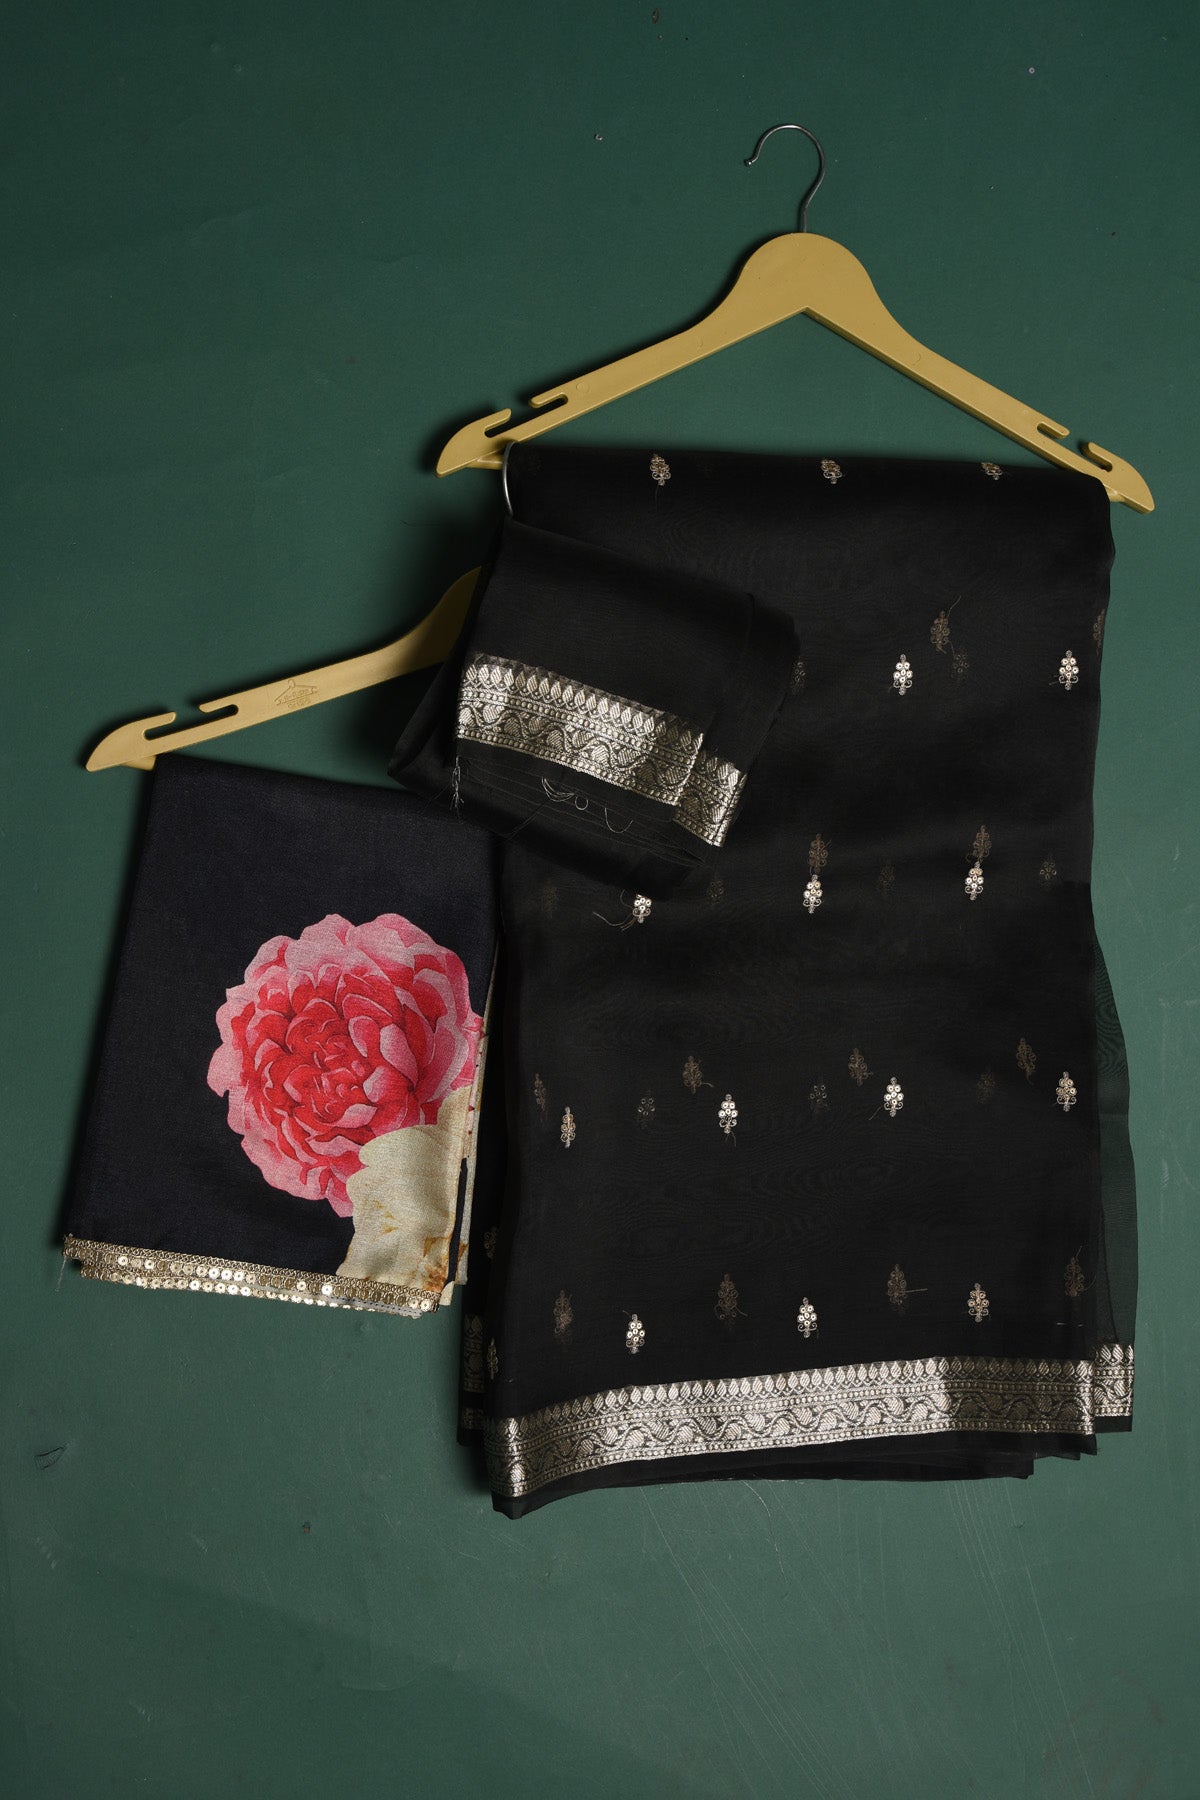 Buy this elegant black soft organza designer saree with silver zari work on heavy border online in USA. Organza silk fabric is a type of silk cloth that is crisp, translucent, and extremely light in weight. It is used to make organza silk saree, drapes, and other decorative pieces. Add this designer sari to your collection from Pure Elegance Indian fashion store in USA.-Unstitched blouse.